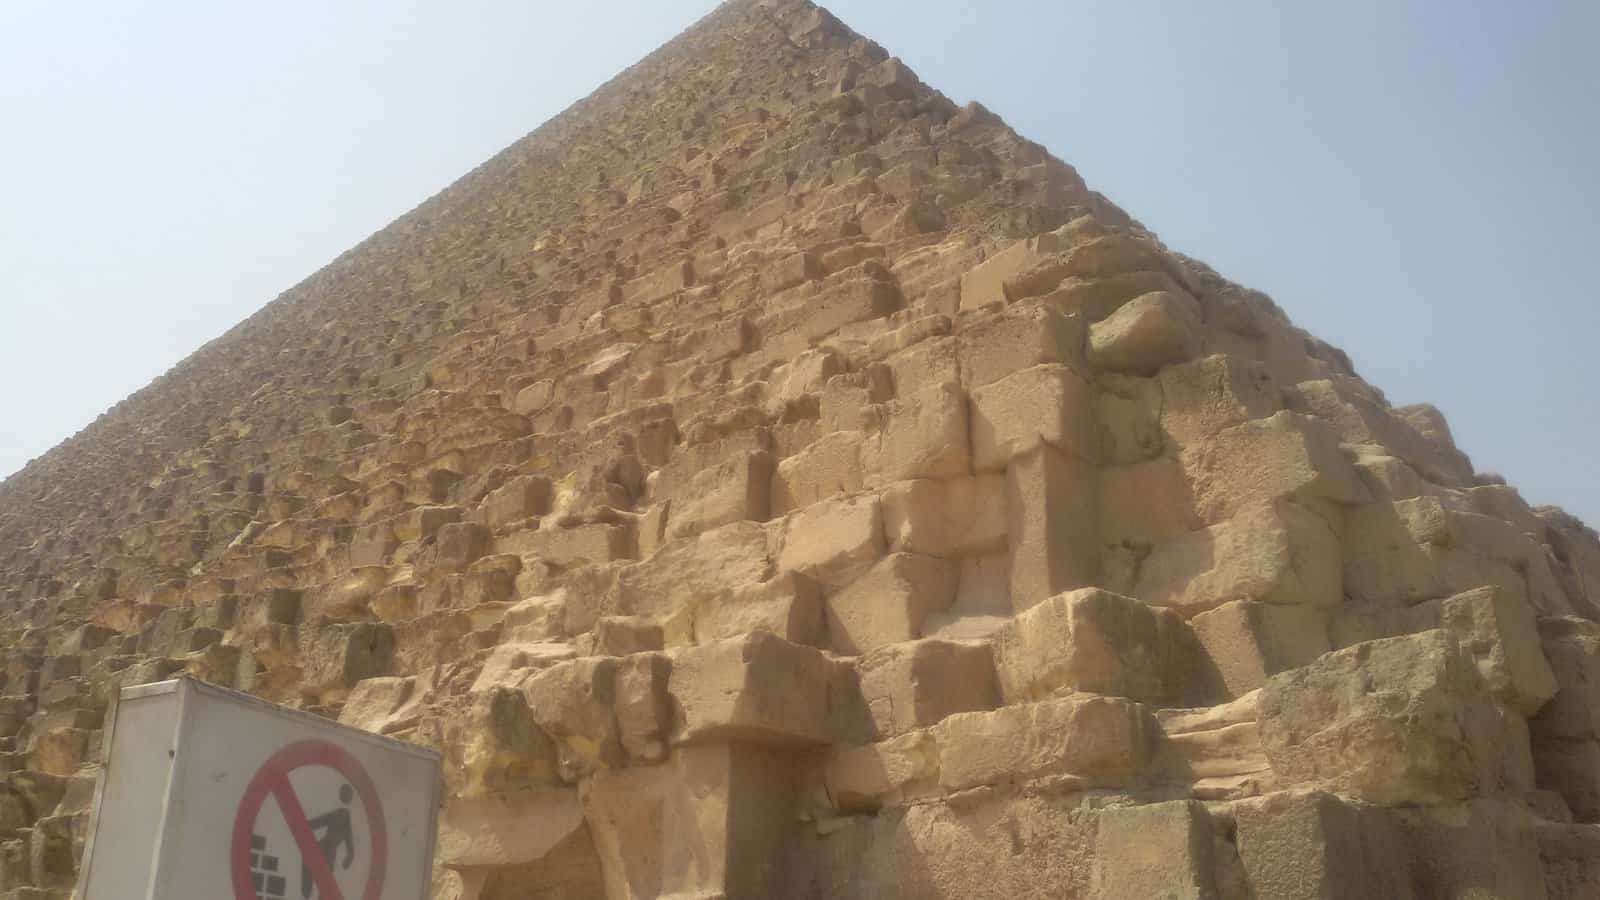 The Pyramids of Giza Ancient Egypt